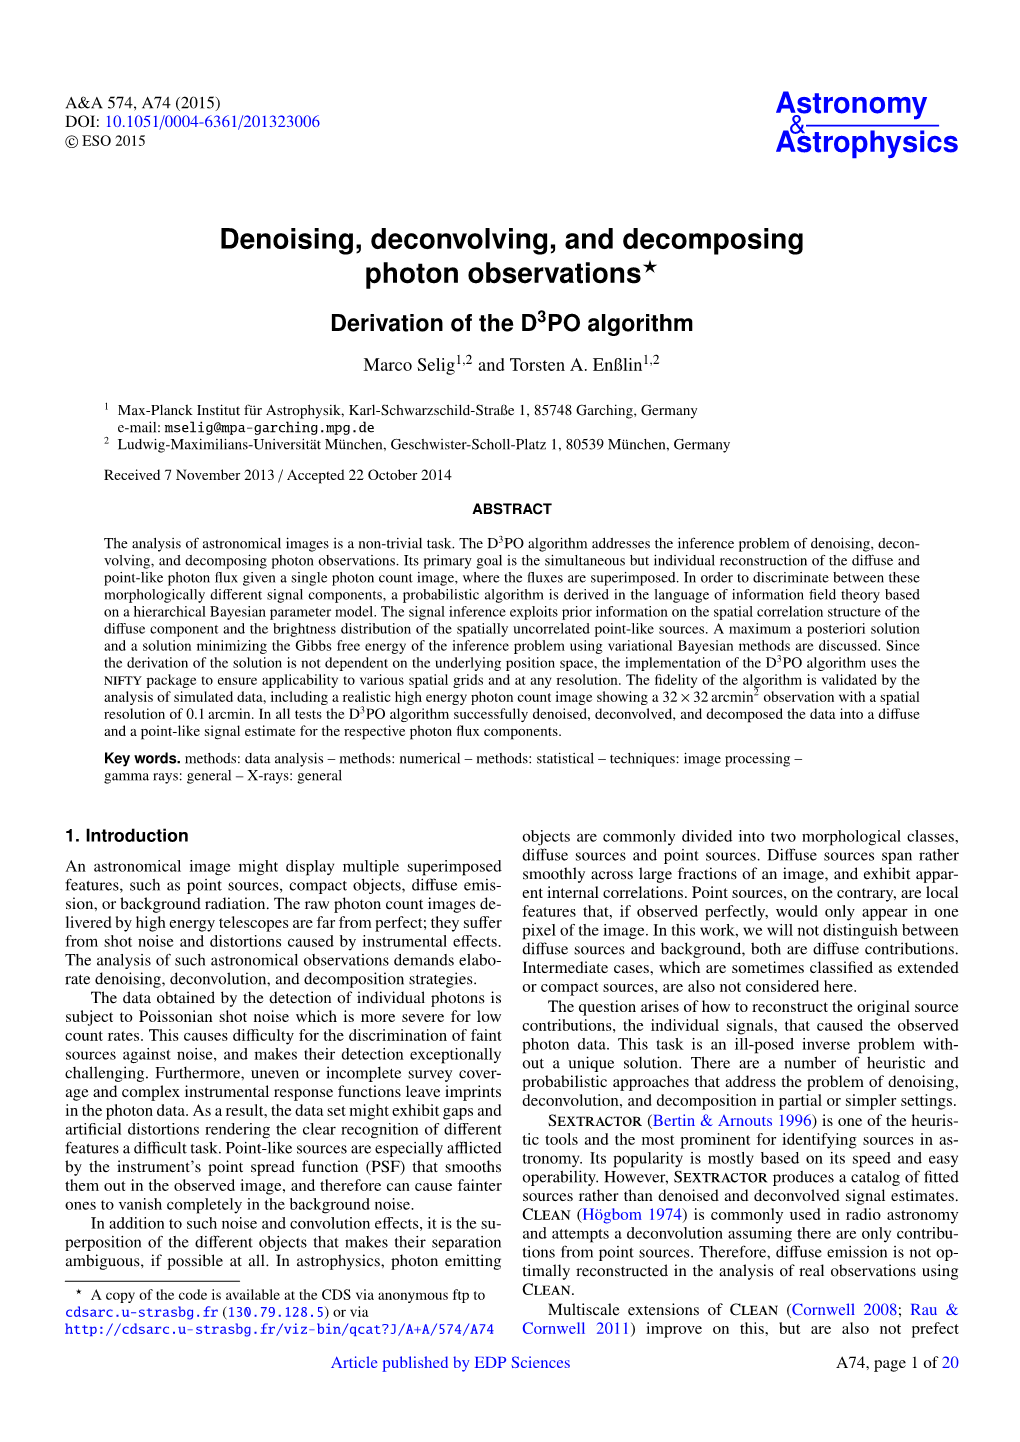 Denoising, Deconvolving, and Decomposing Photon Observations⋆